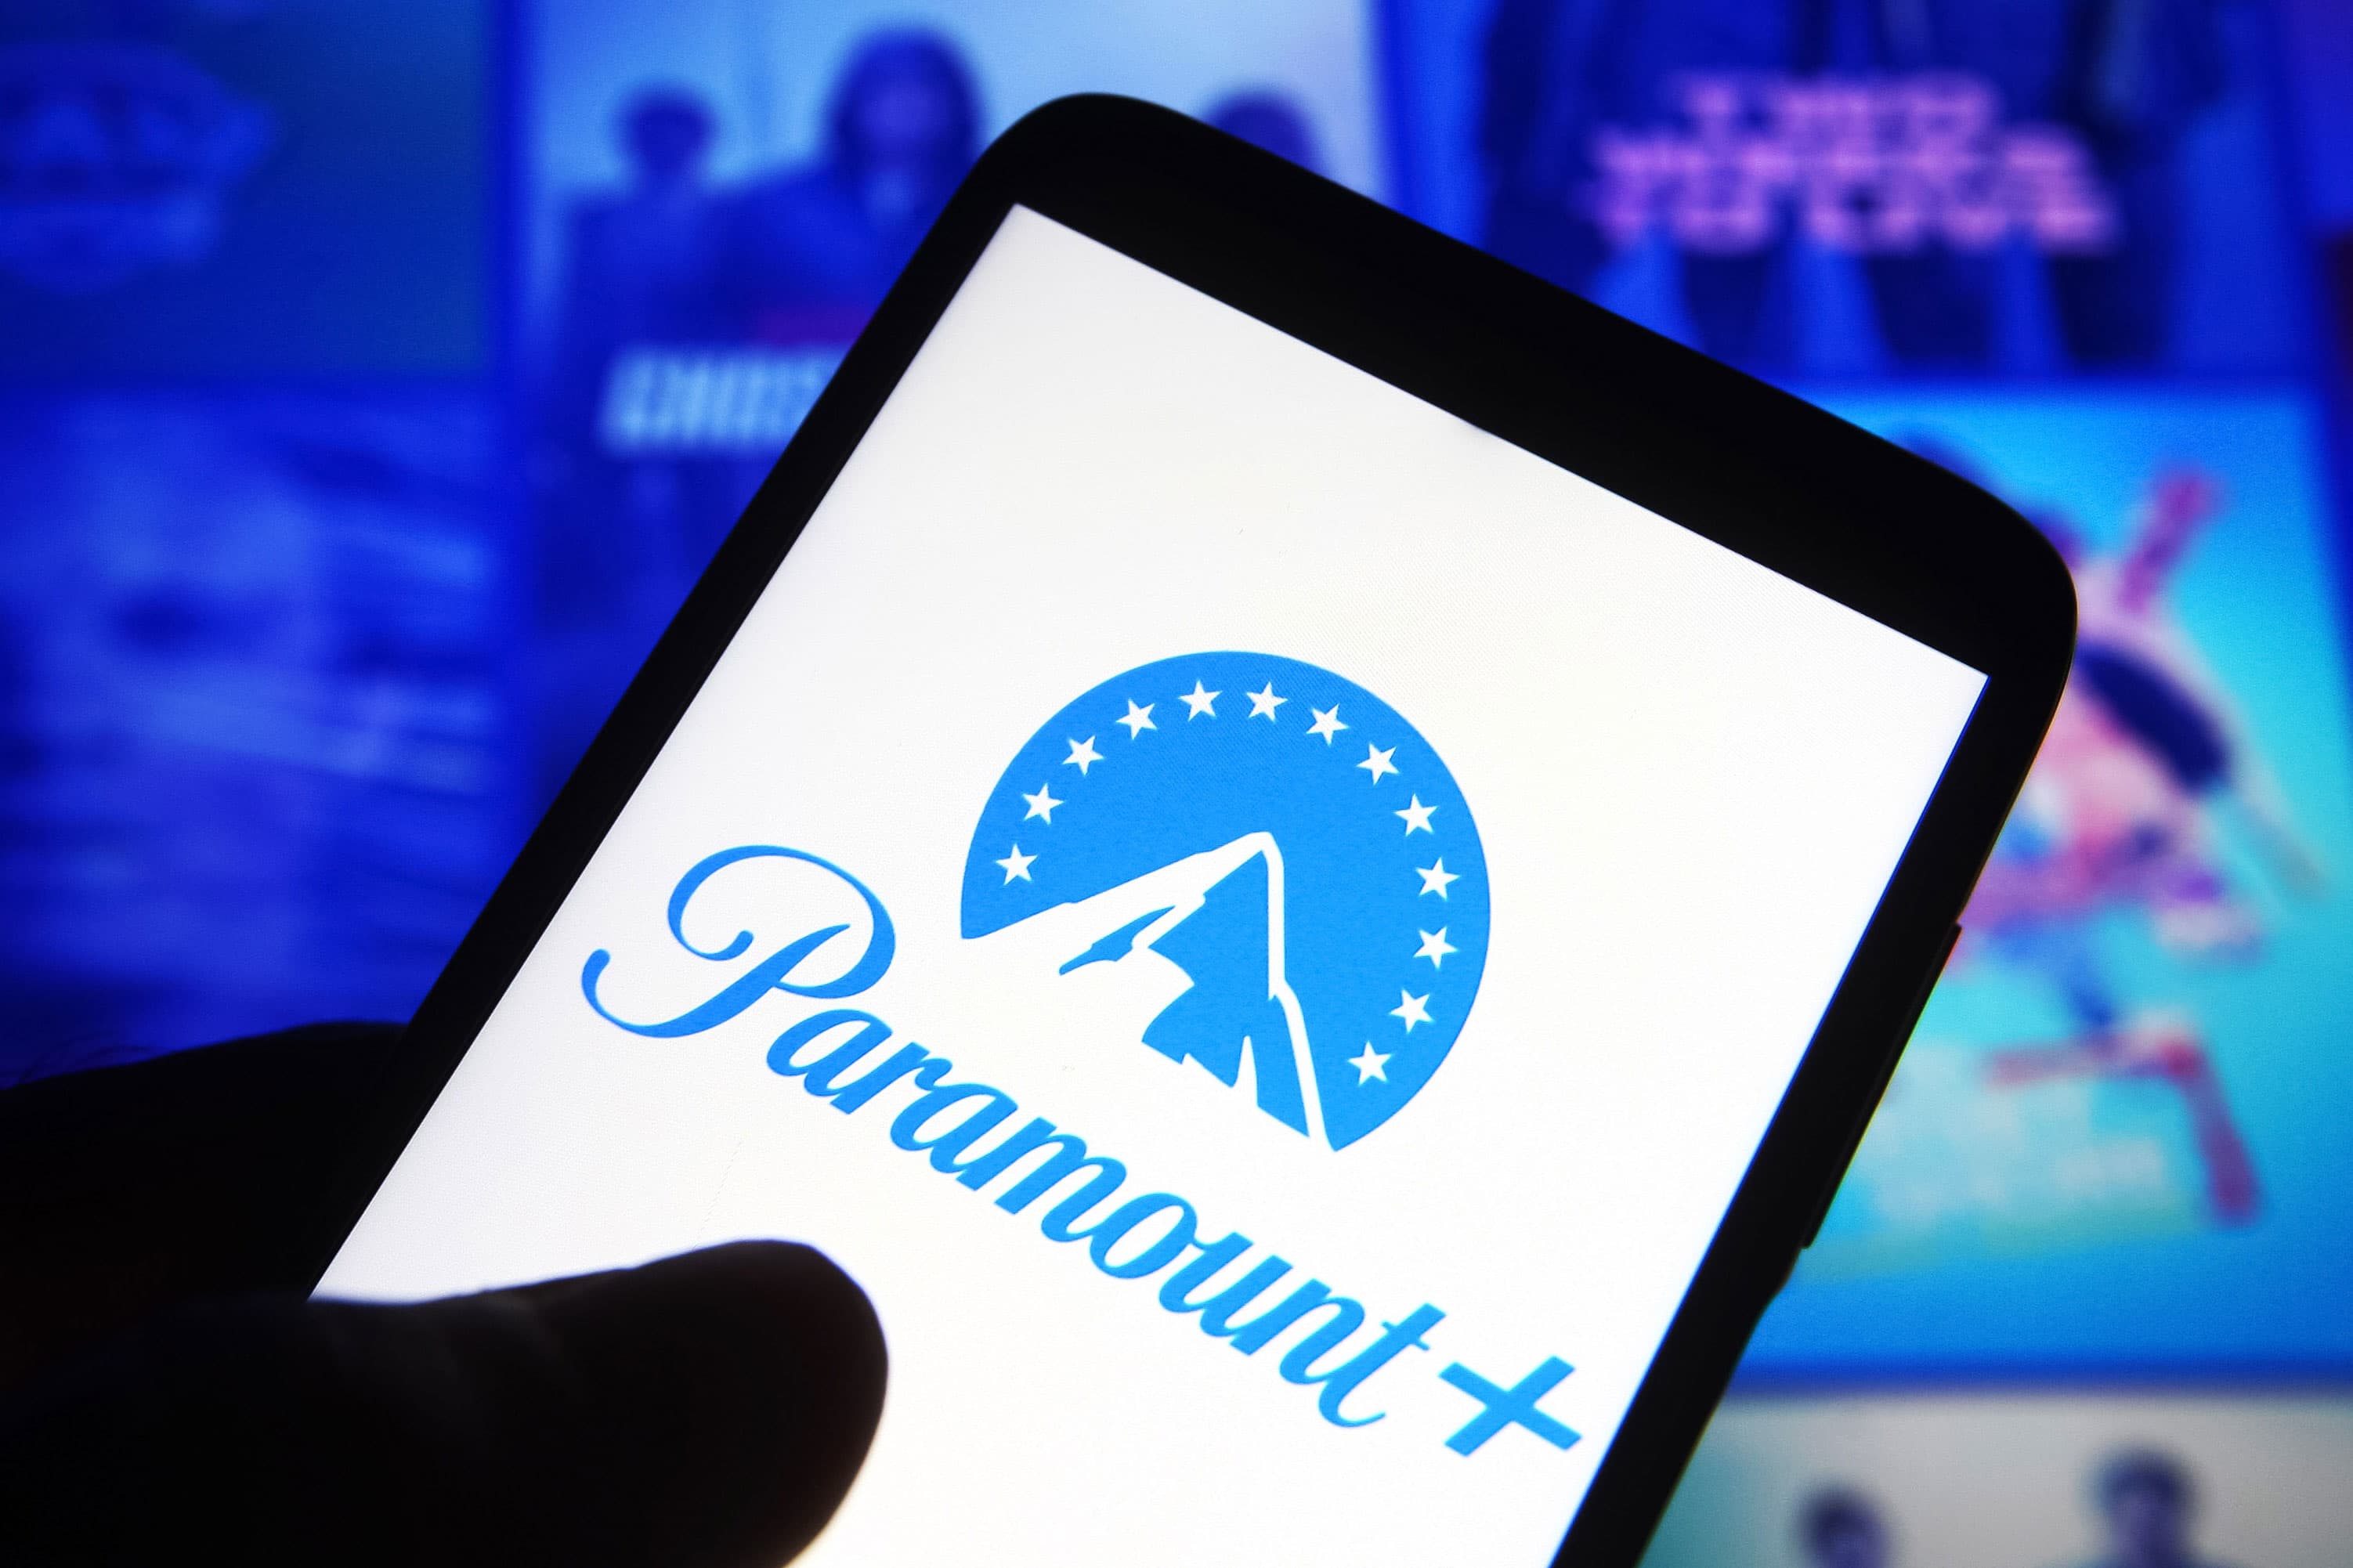 Paramount's earnings growth peak may be in the past, Wells Fargo says in downgrade